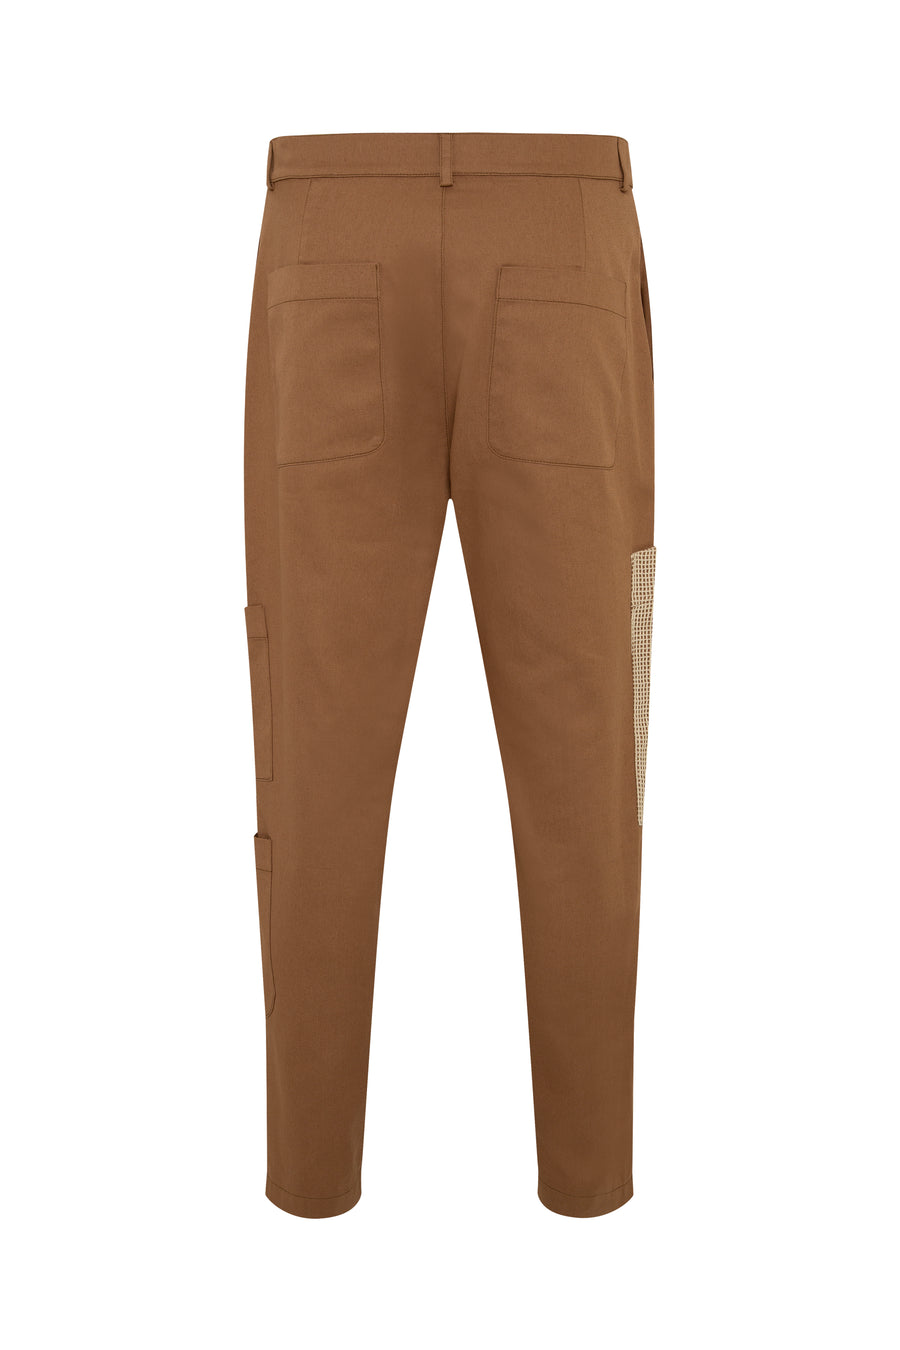 JUSTIN - Straight-leg cargo pants with lace applique detail